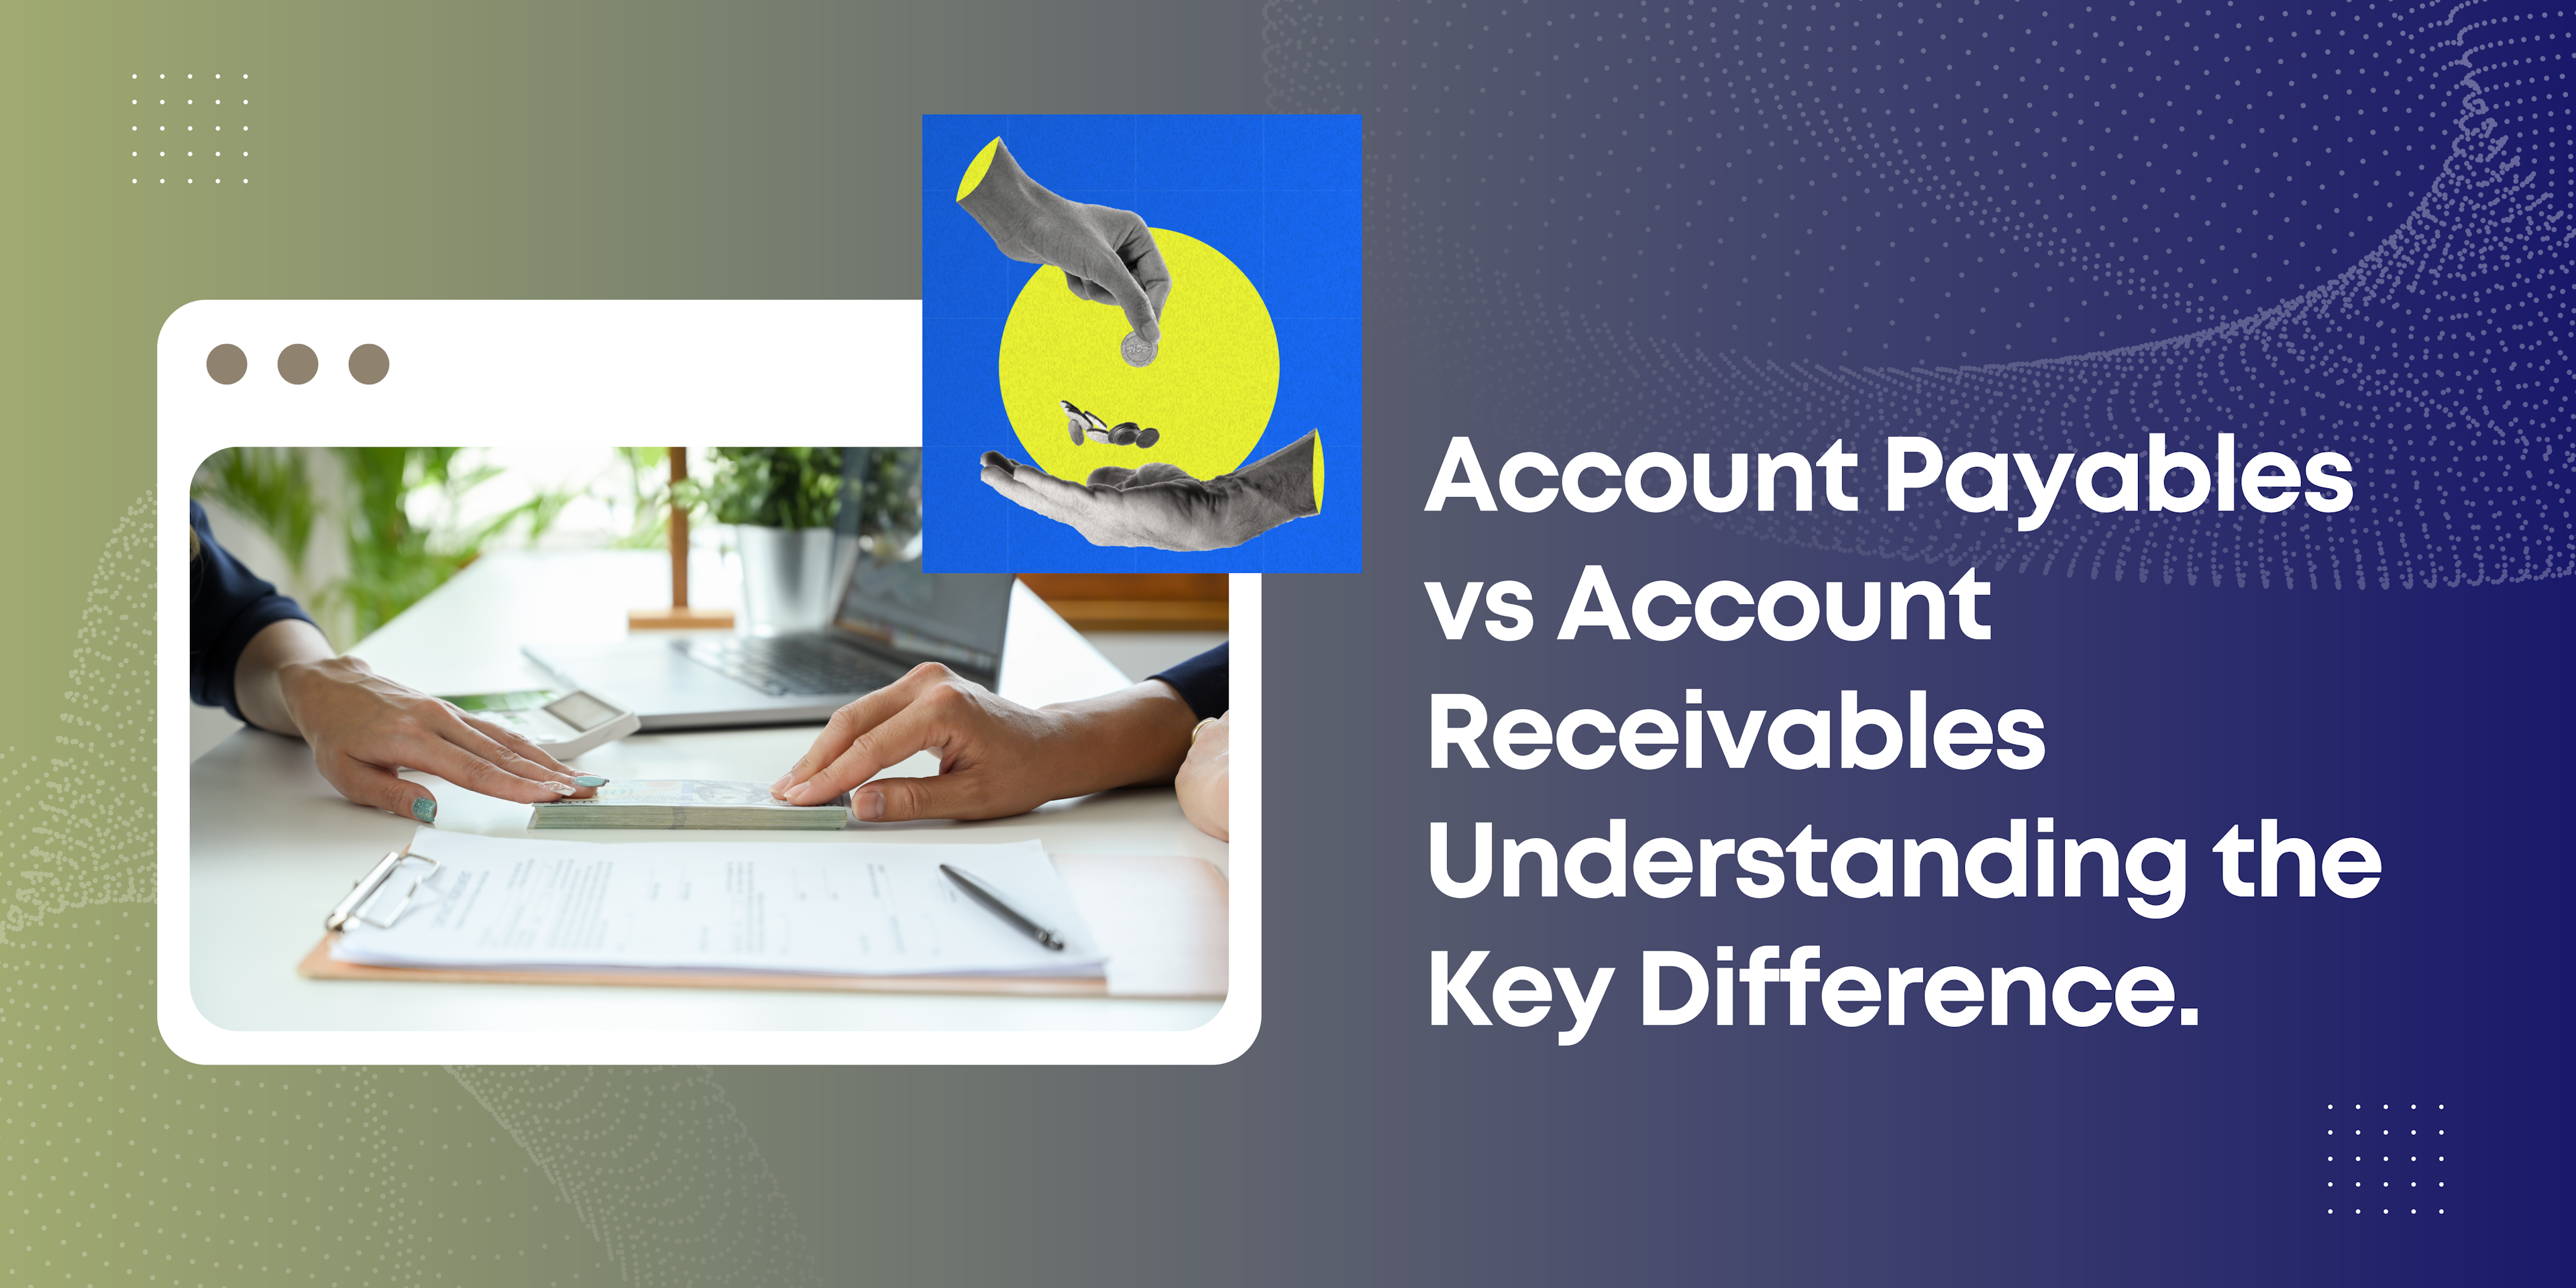 Key Differences between Account Payables and Account Receivables